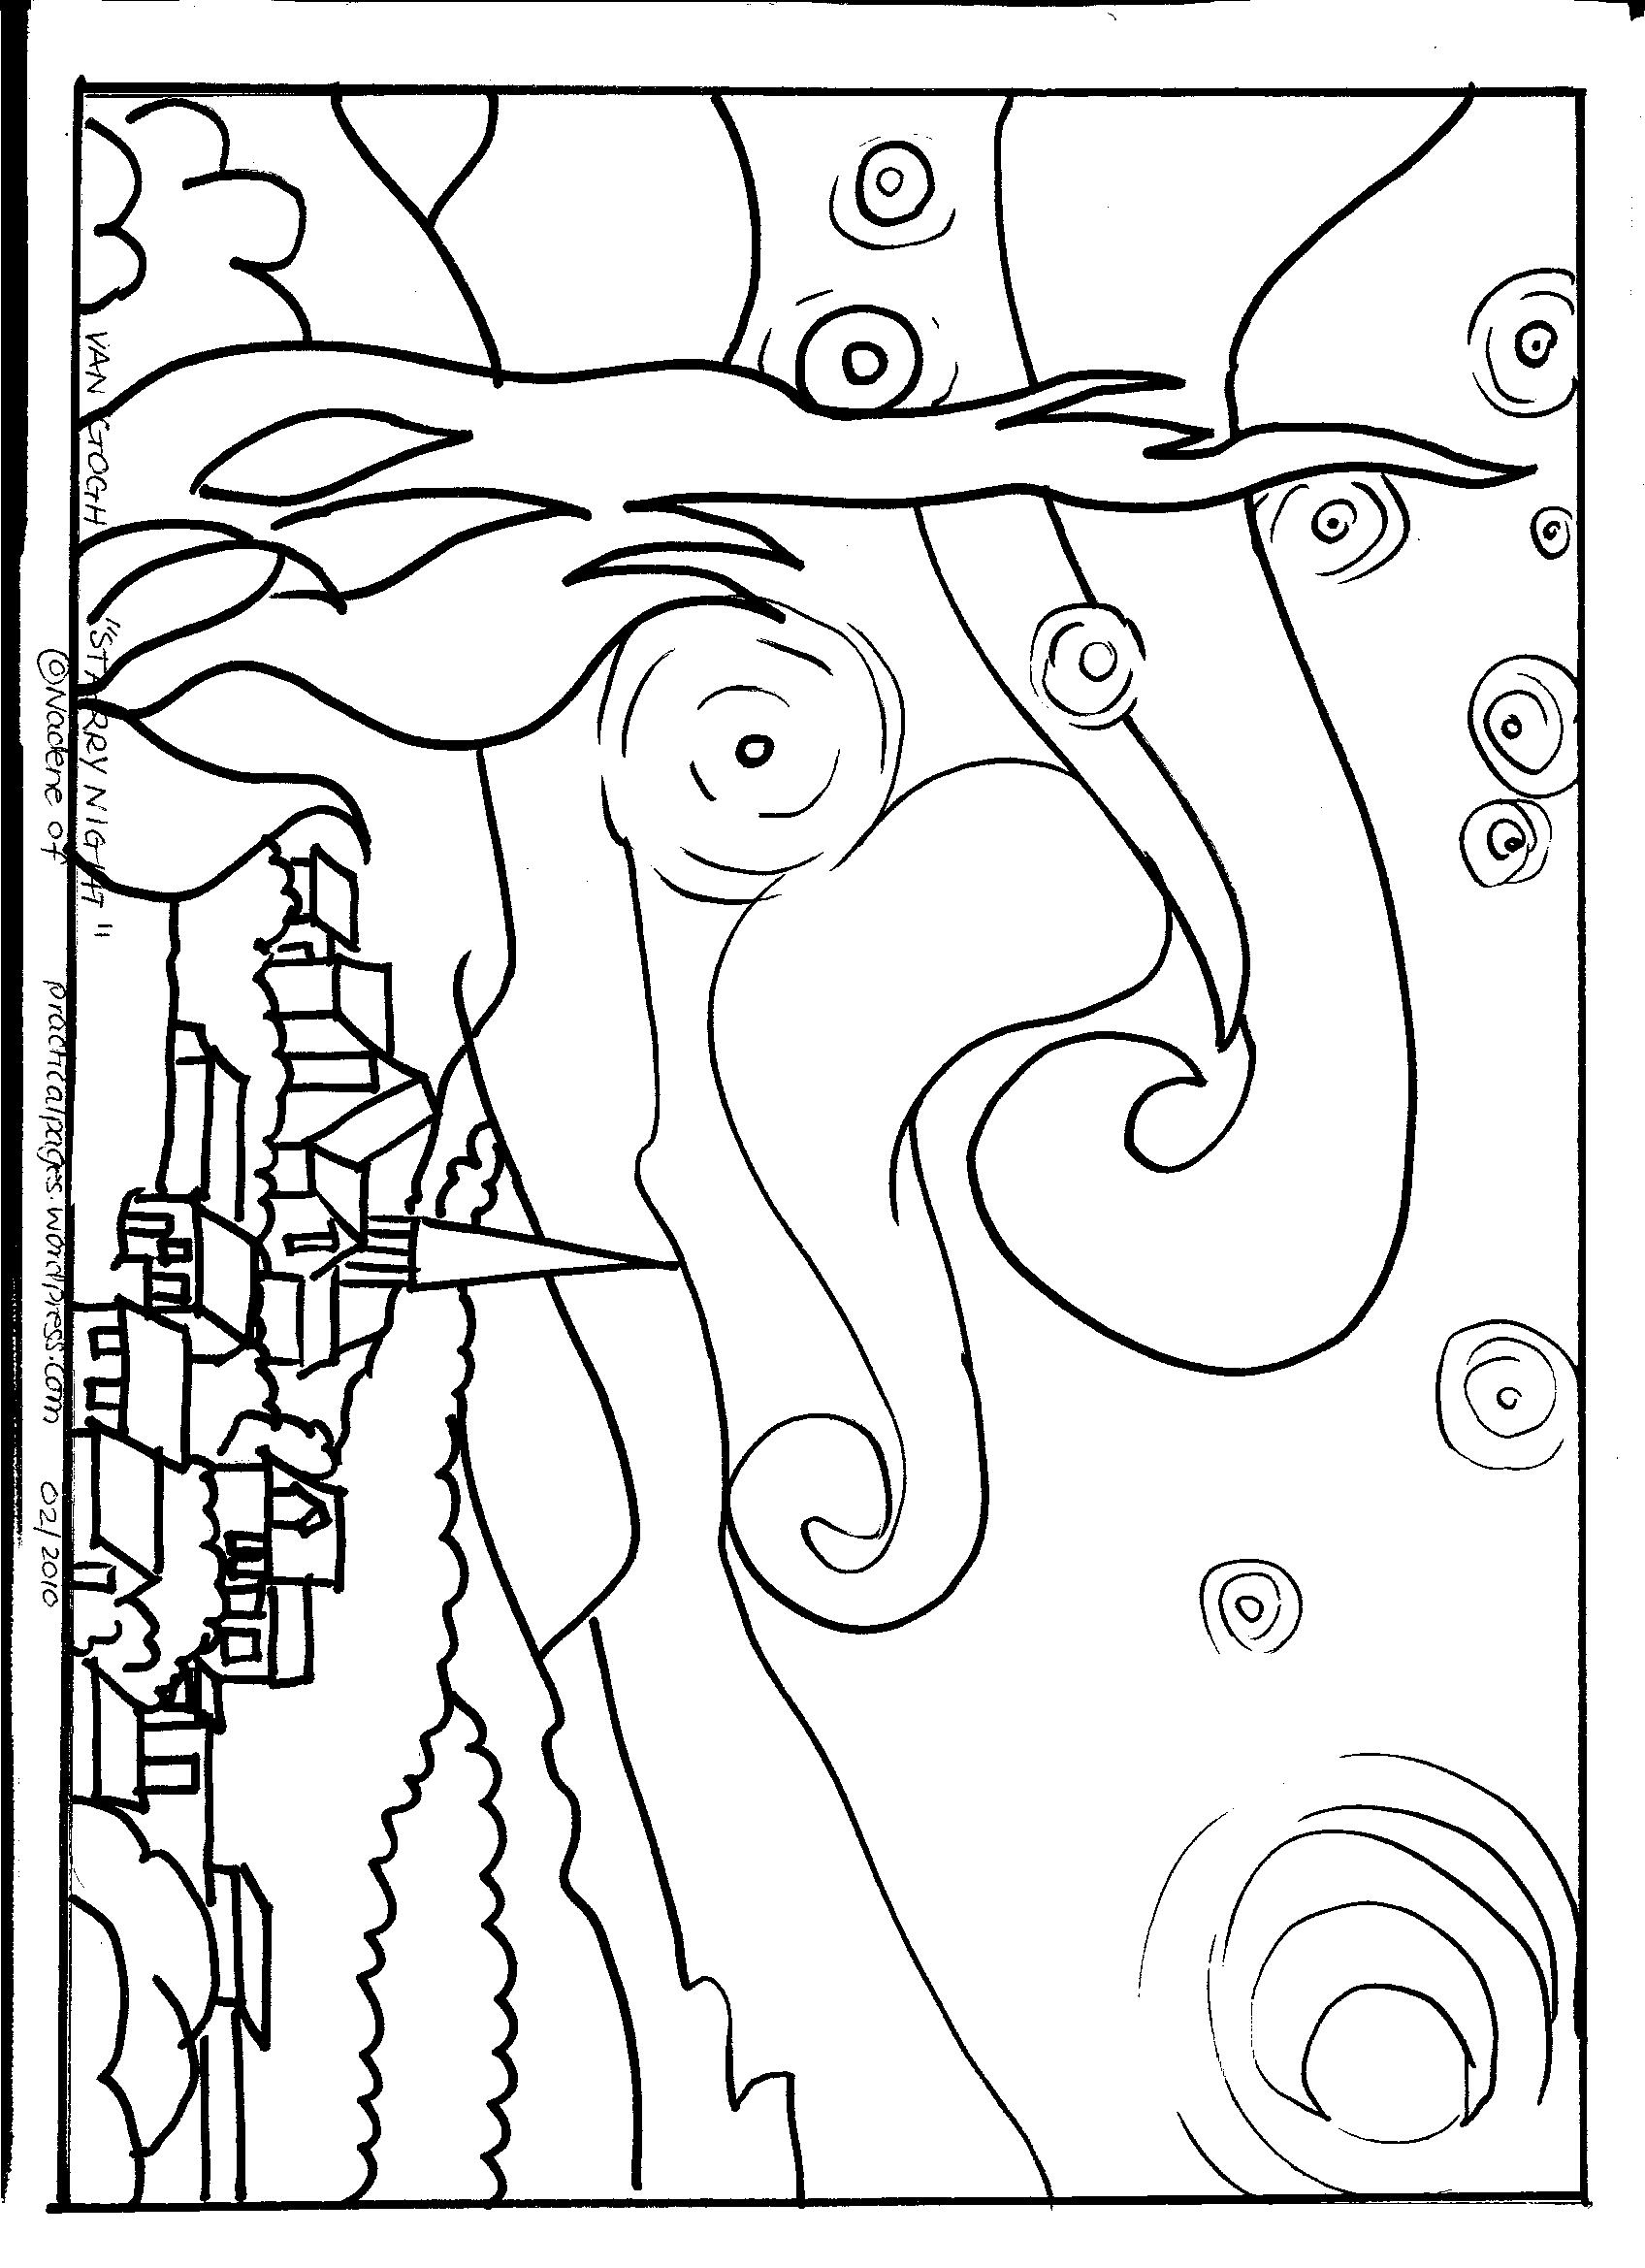 Van Gogh Starry Night Coloring Page Image